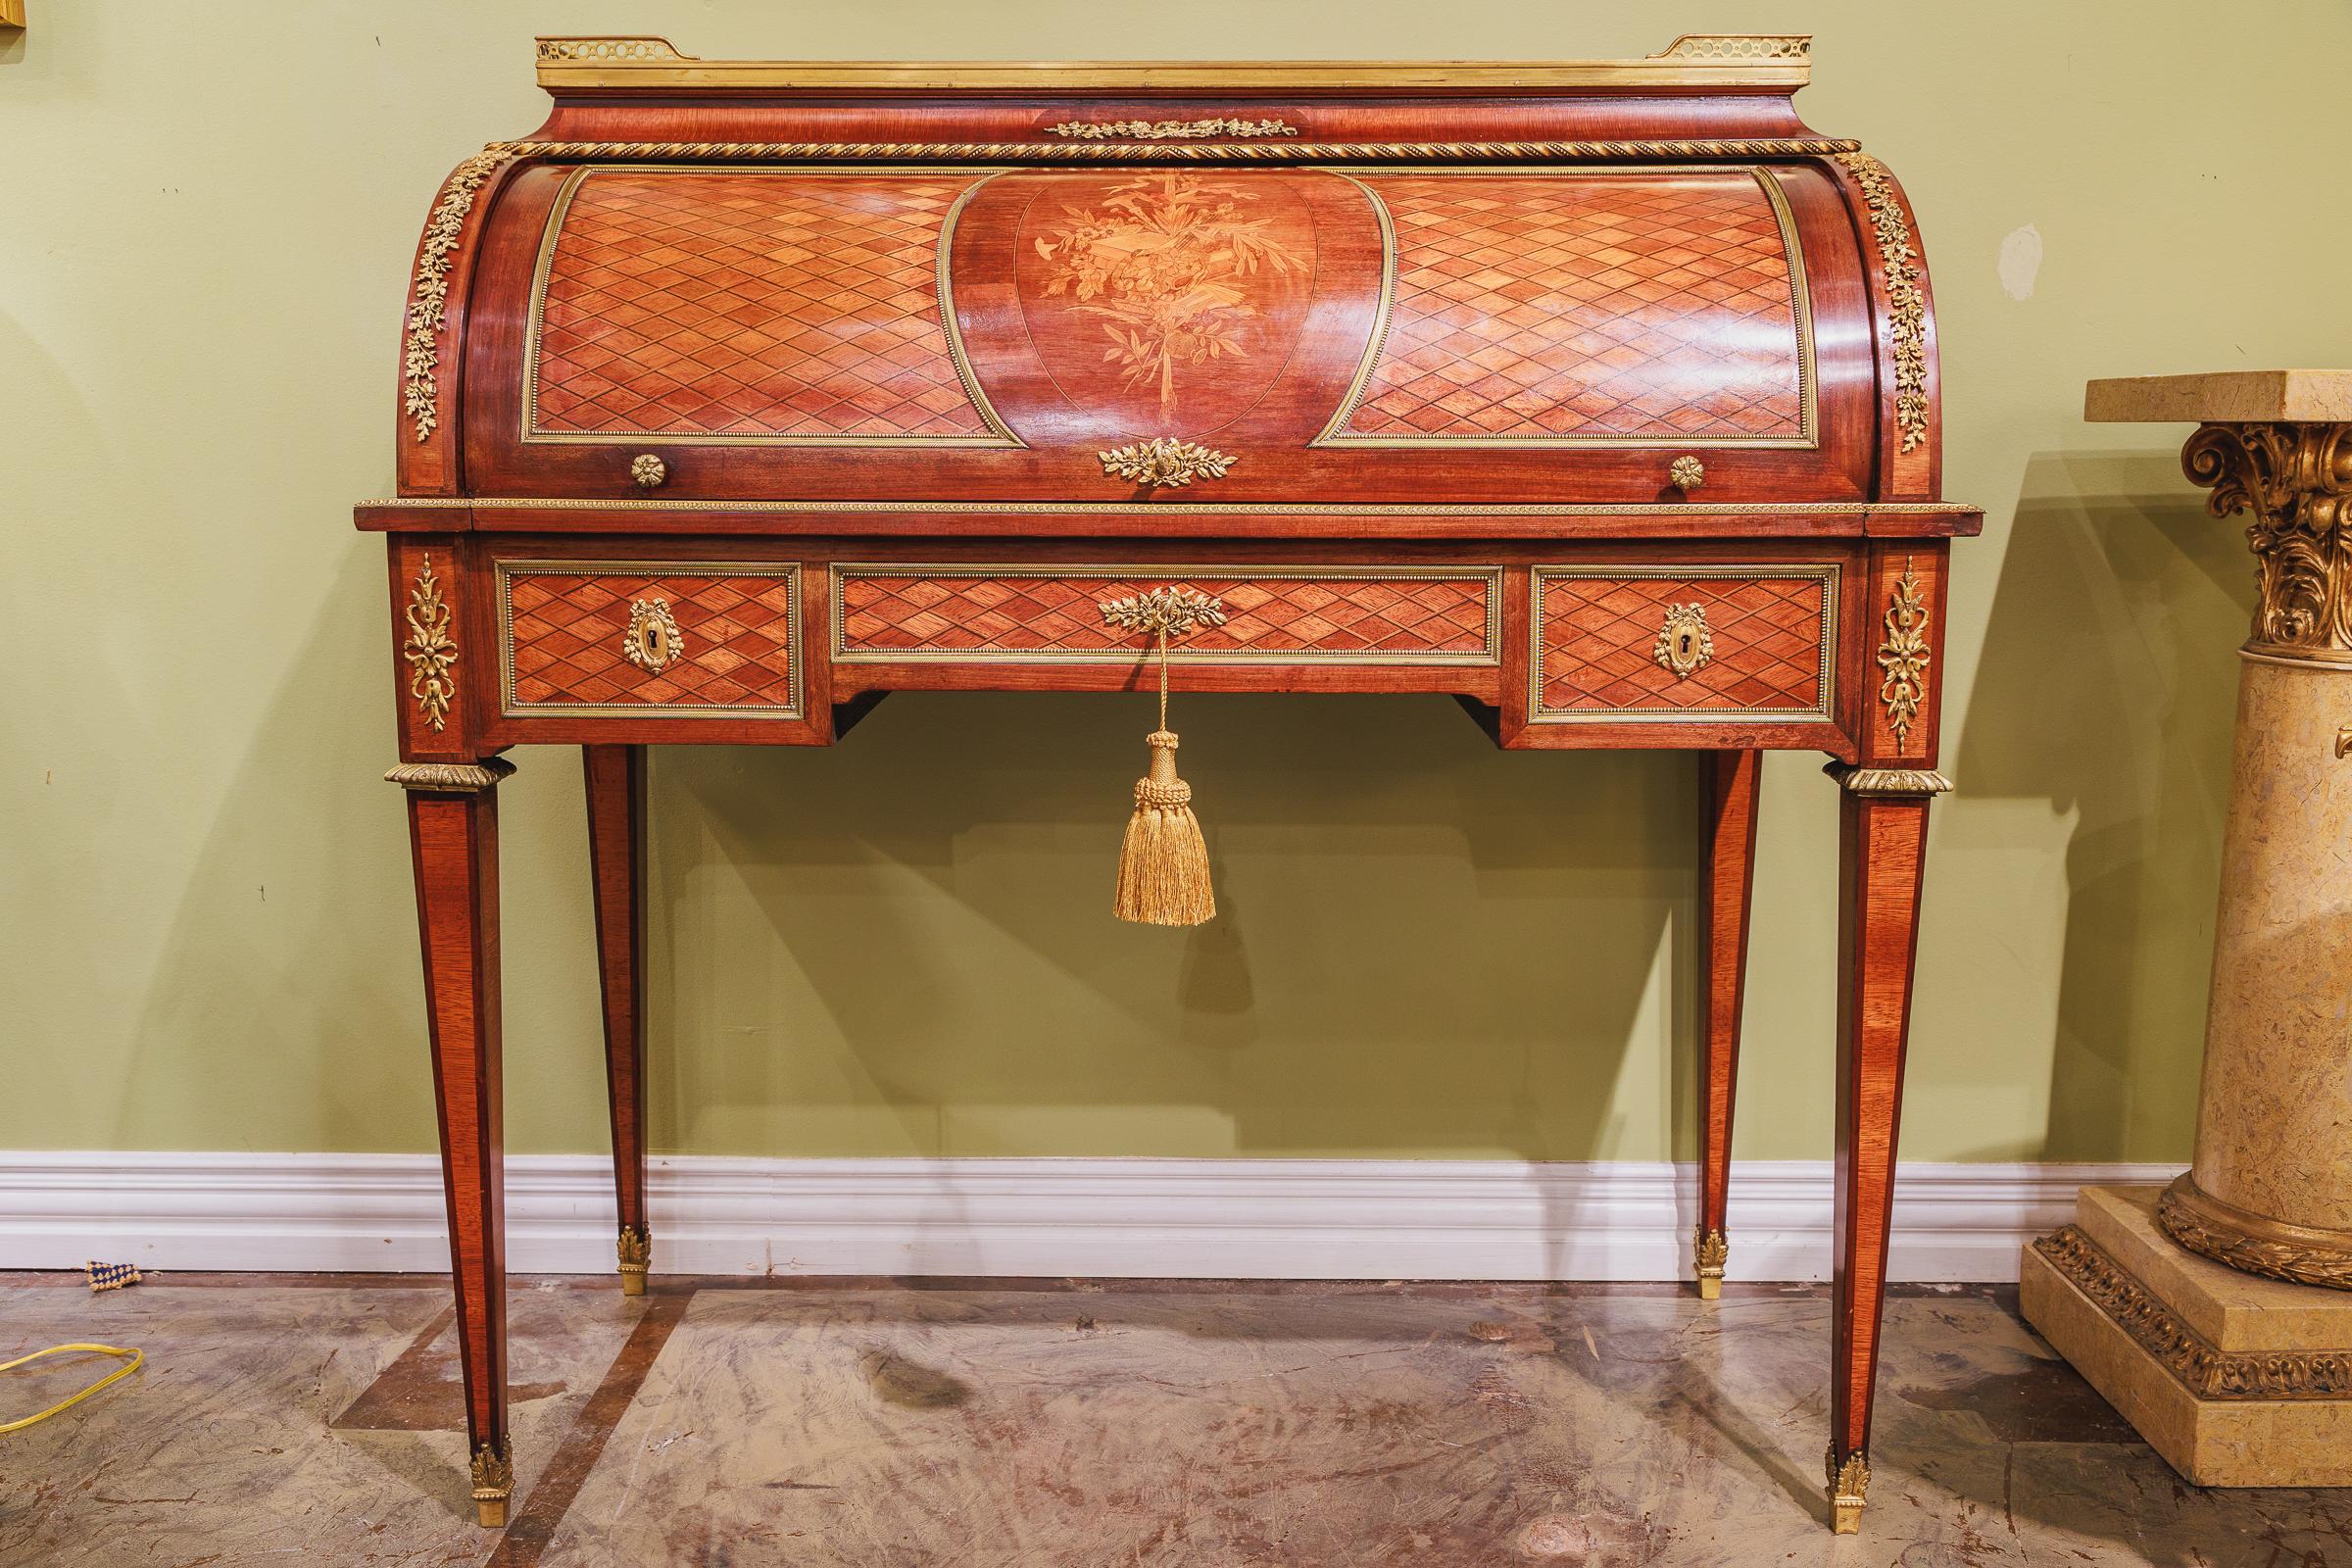 A very fine 19th century French Louis XVI kingwood and tulipwood marquetry rolltop desk. Fine gilt bronze mounts with a beautiful marble top. Signed Paul Sormani.